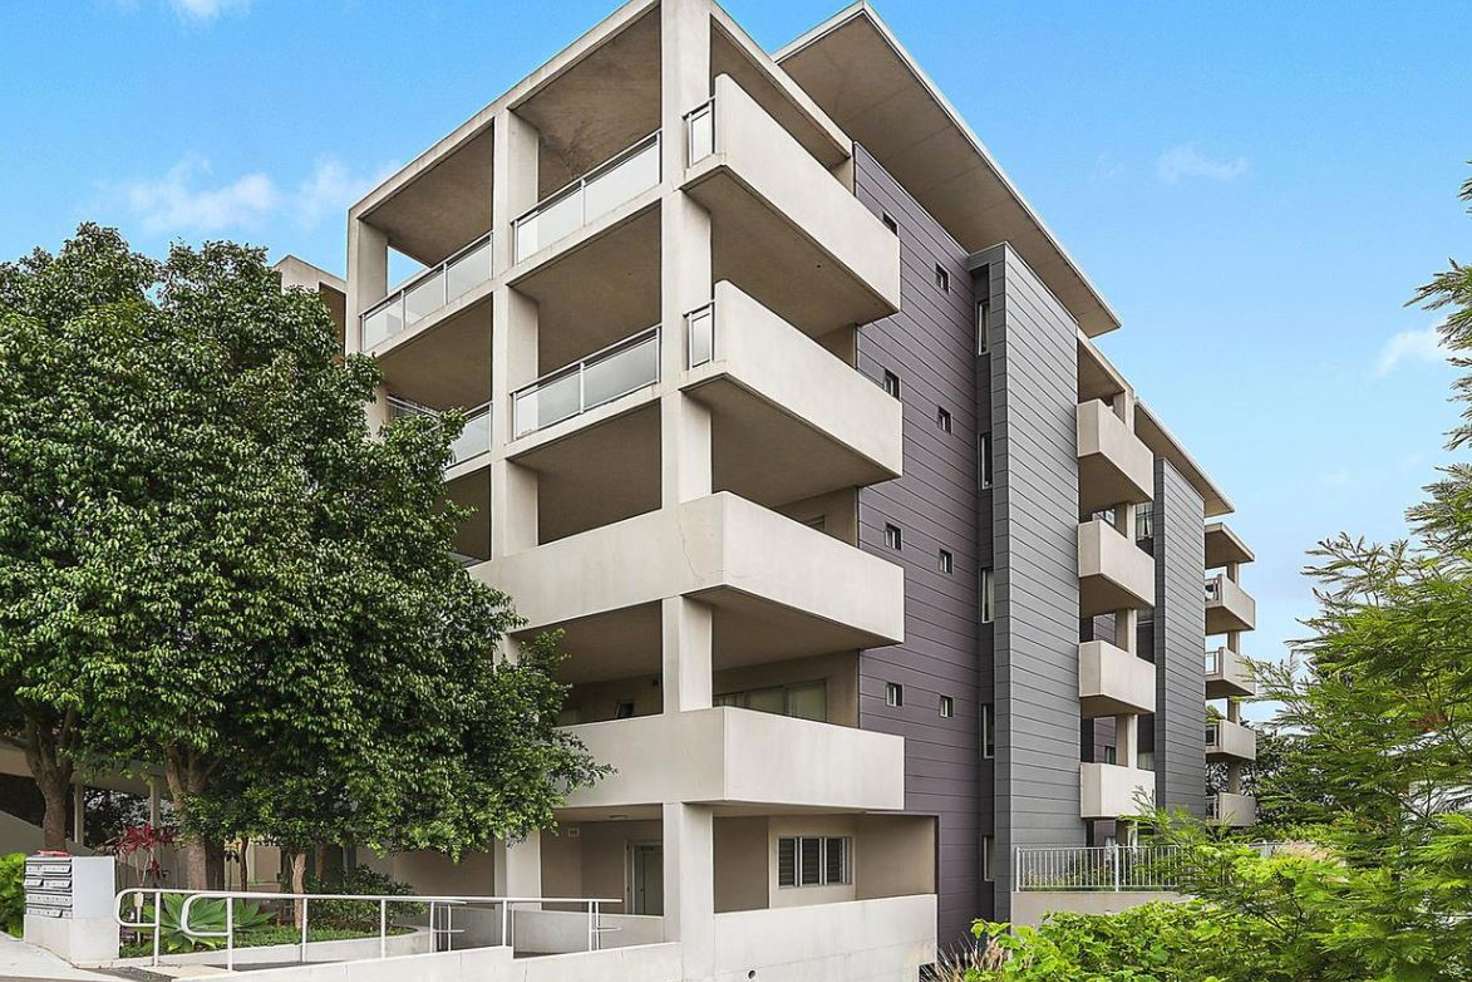 Main view of Homely apartment listing, 7/12 LOFTUS STREET, Wollongong NSW 2500